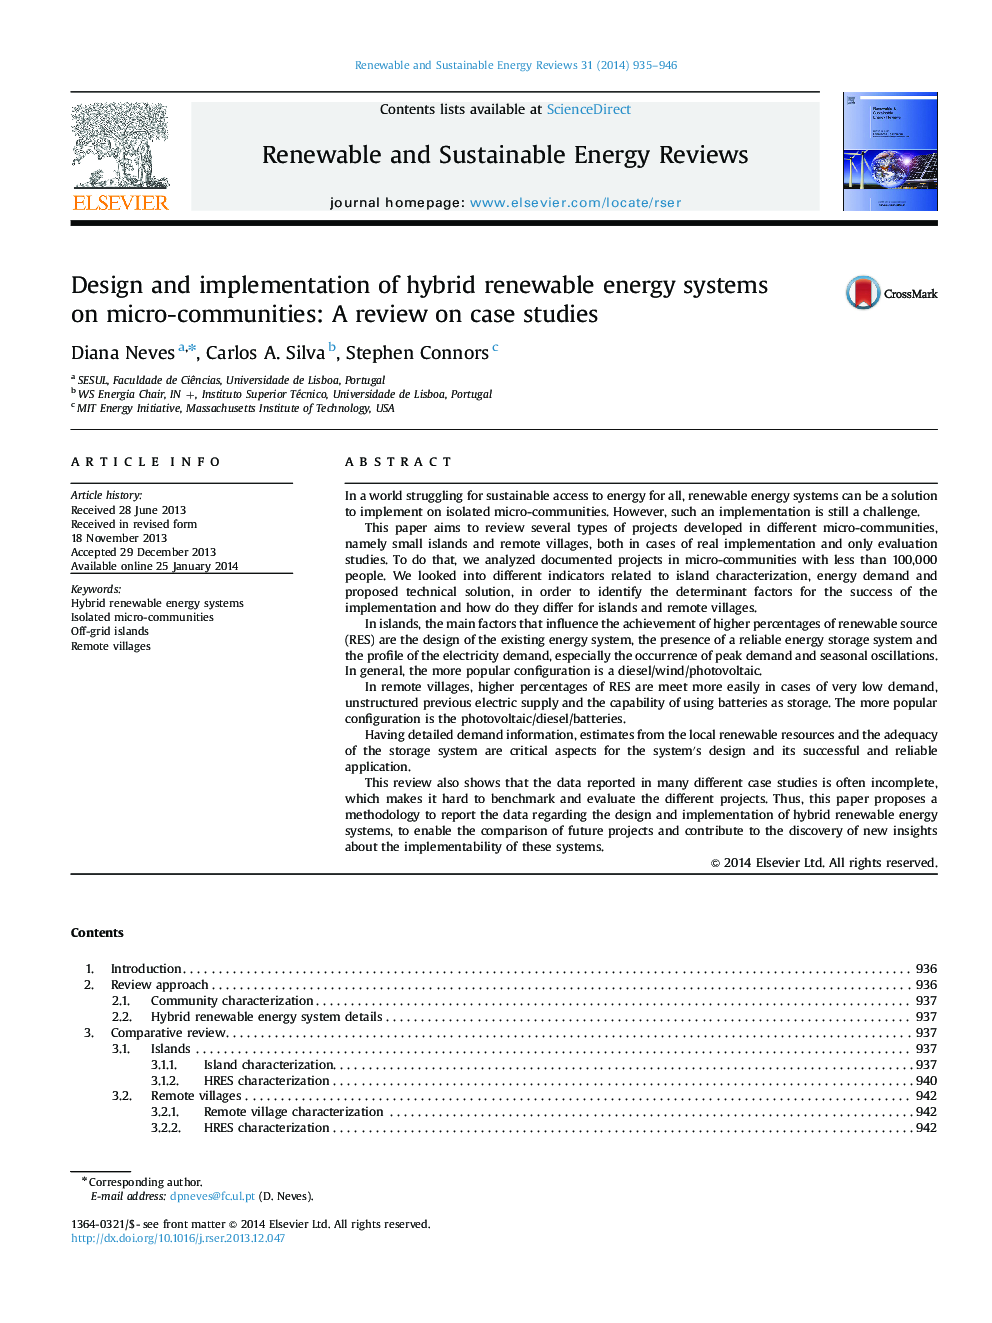 Design and implementation of hybrid renewable energy systems on micro-communities: A review on case studies